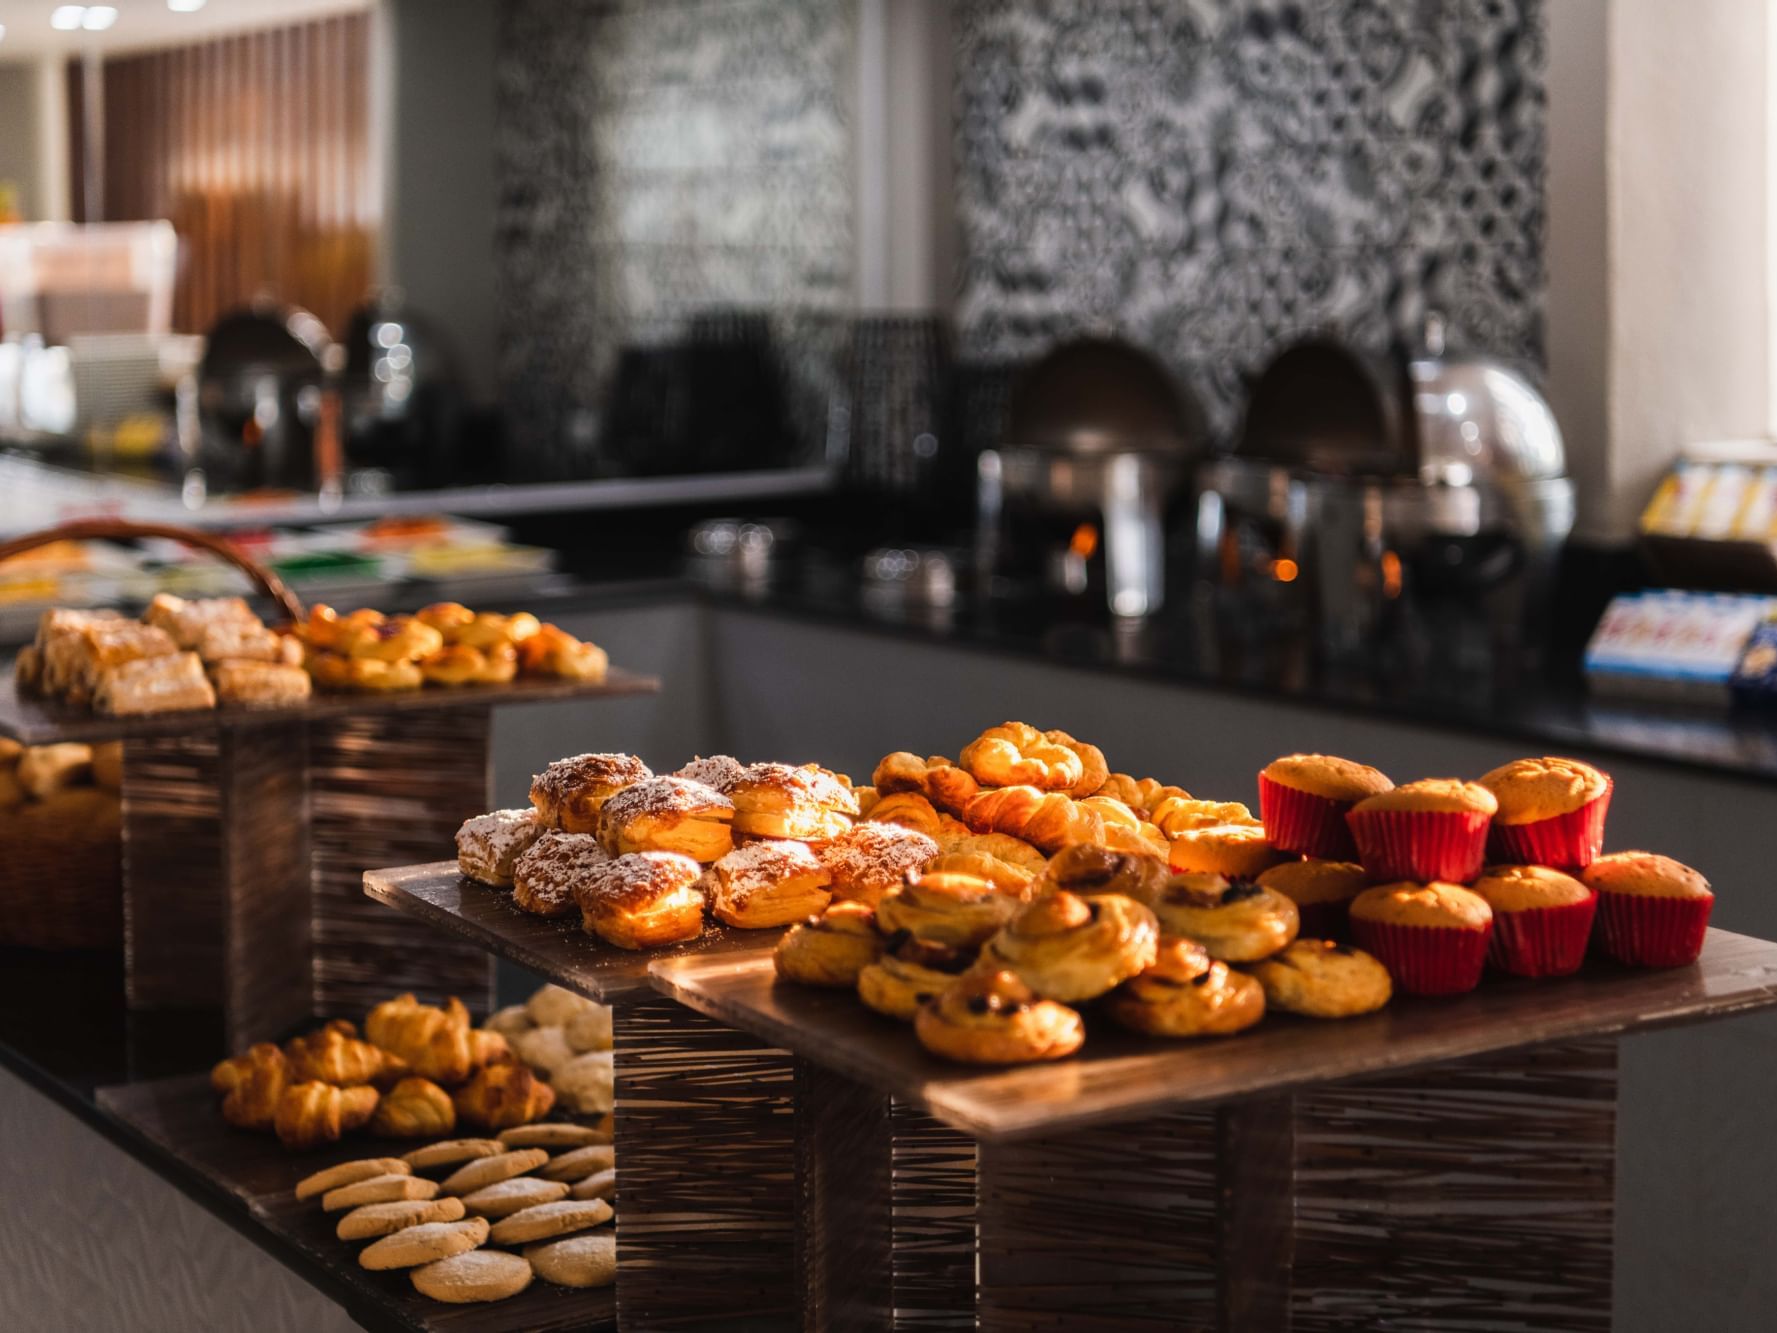 Baked goods displayed on the counter at La Colección Resorts